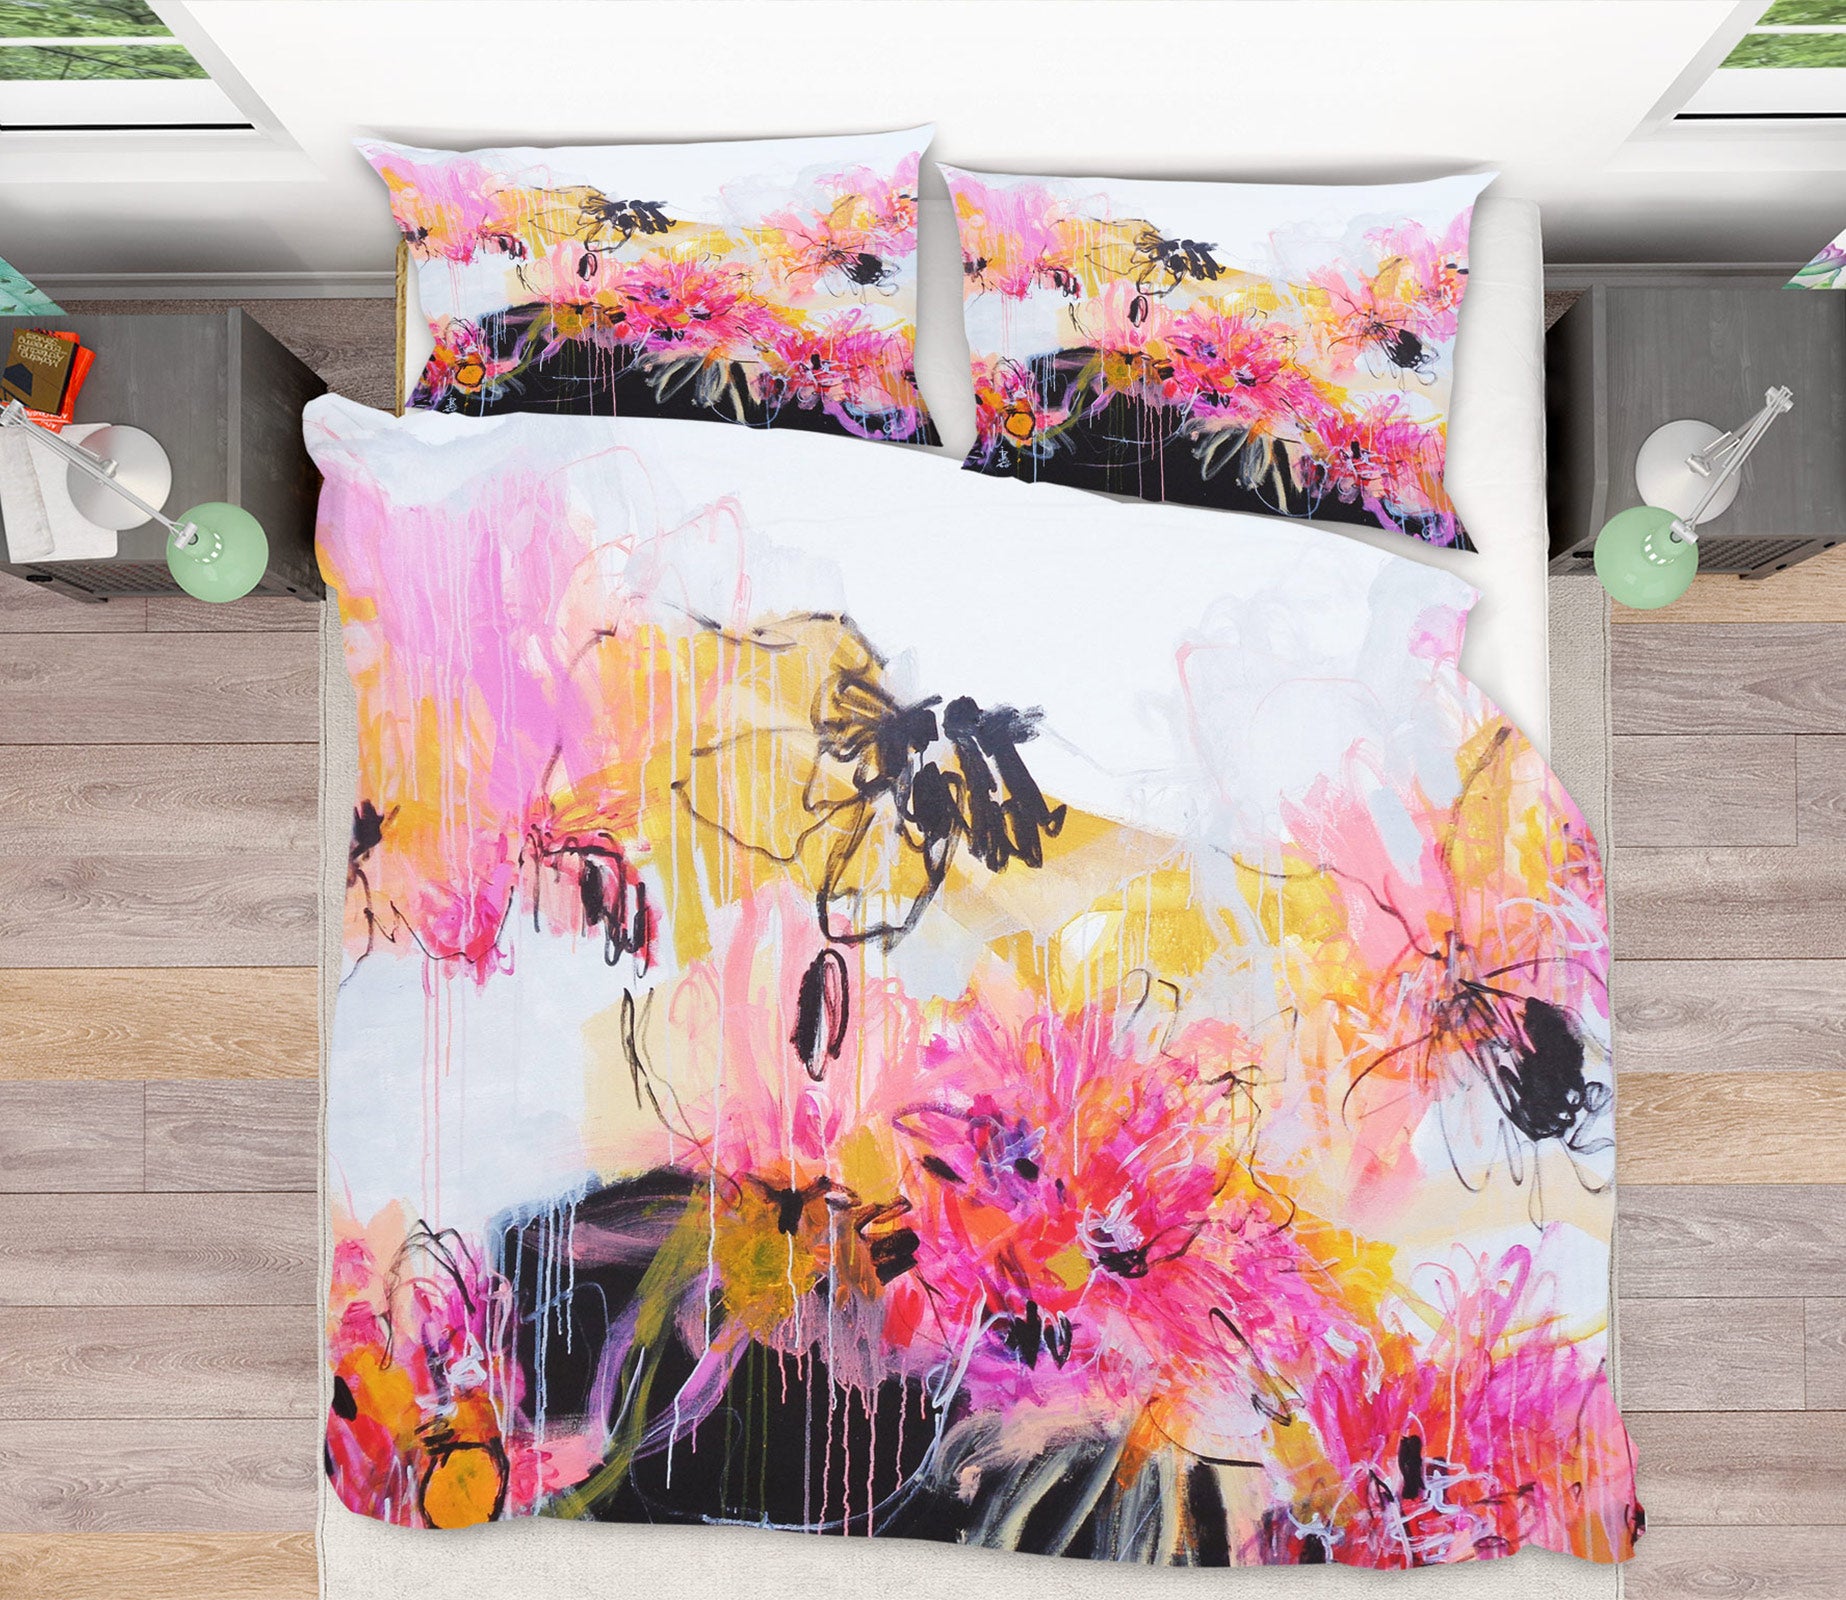 3D Pink Watercolor Flowers 1145 Misako Chida Bedding Bed Pillowcases Quilt Cover Duvet Cover